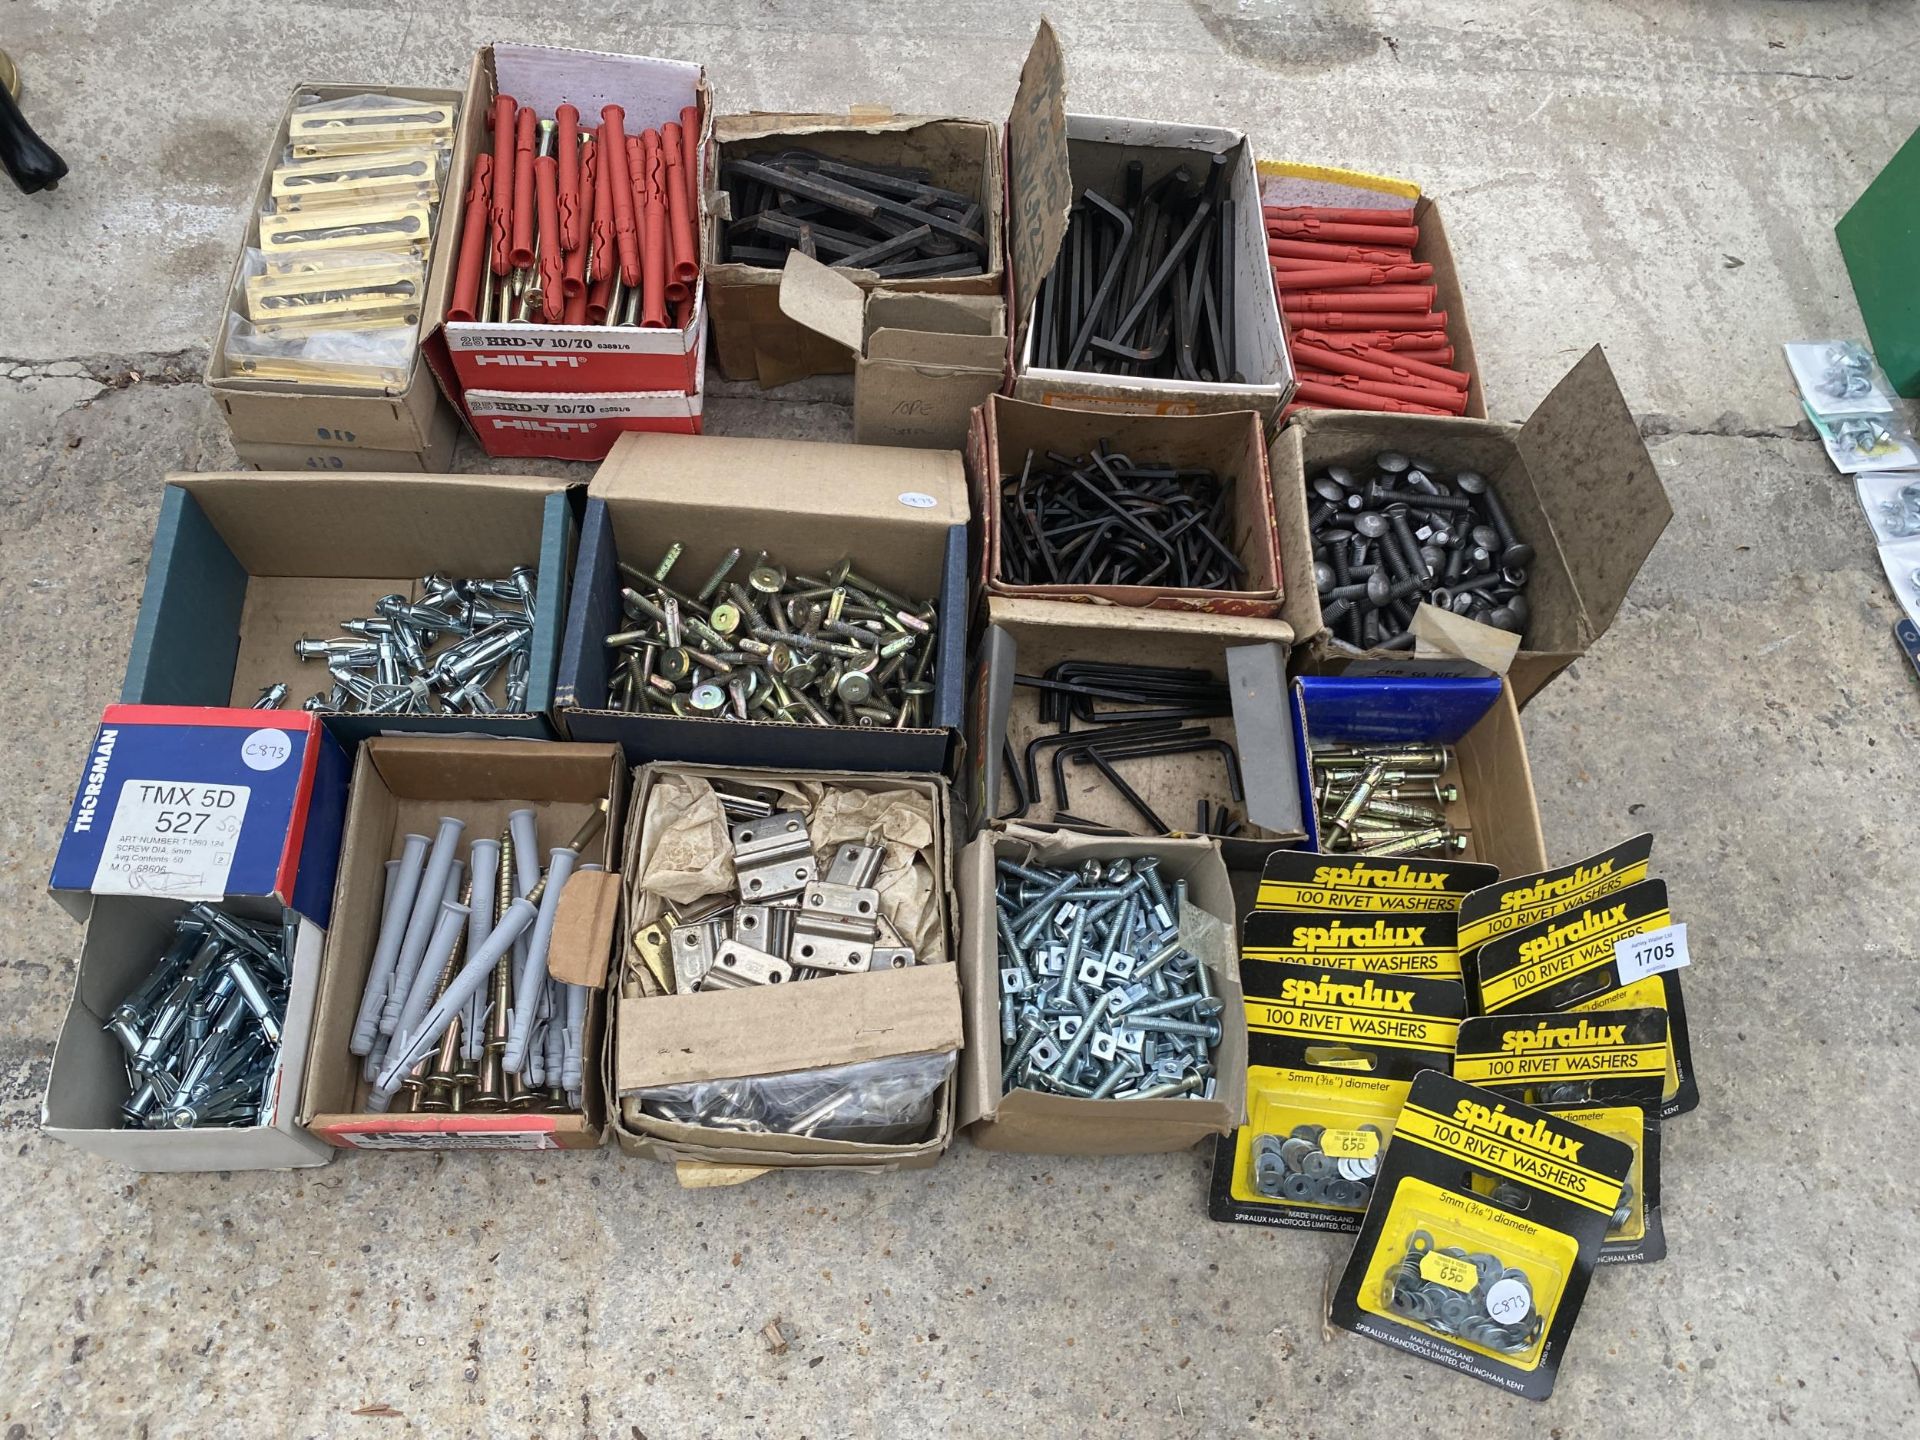 A LARGE ASSORTMENT OF ITEMS TO INCLUDE ALAN KEYS, BOLTS AND SCREWS ETC